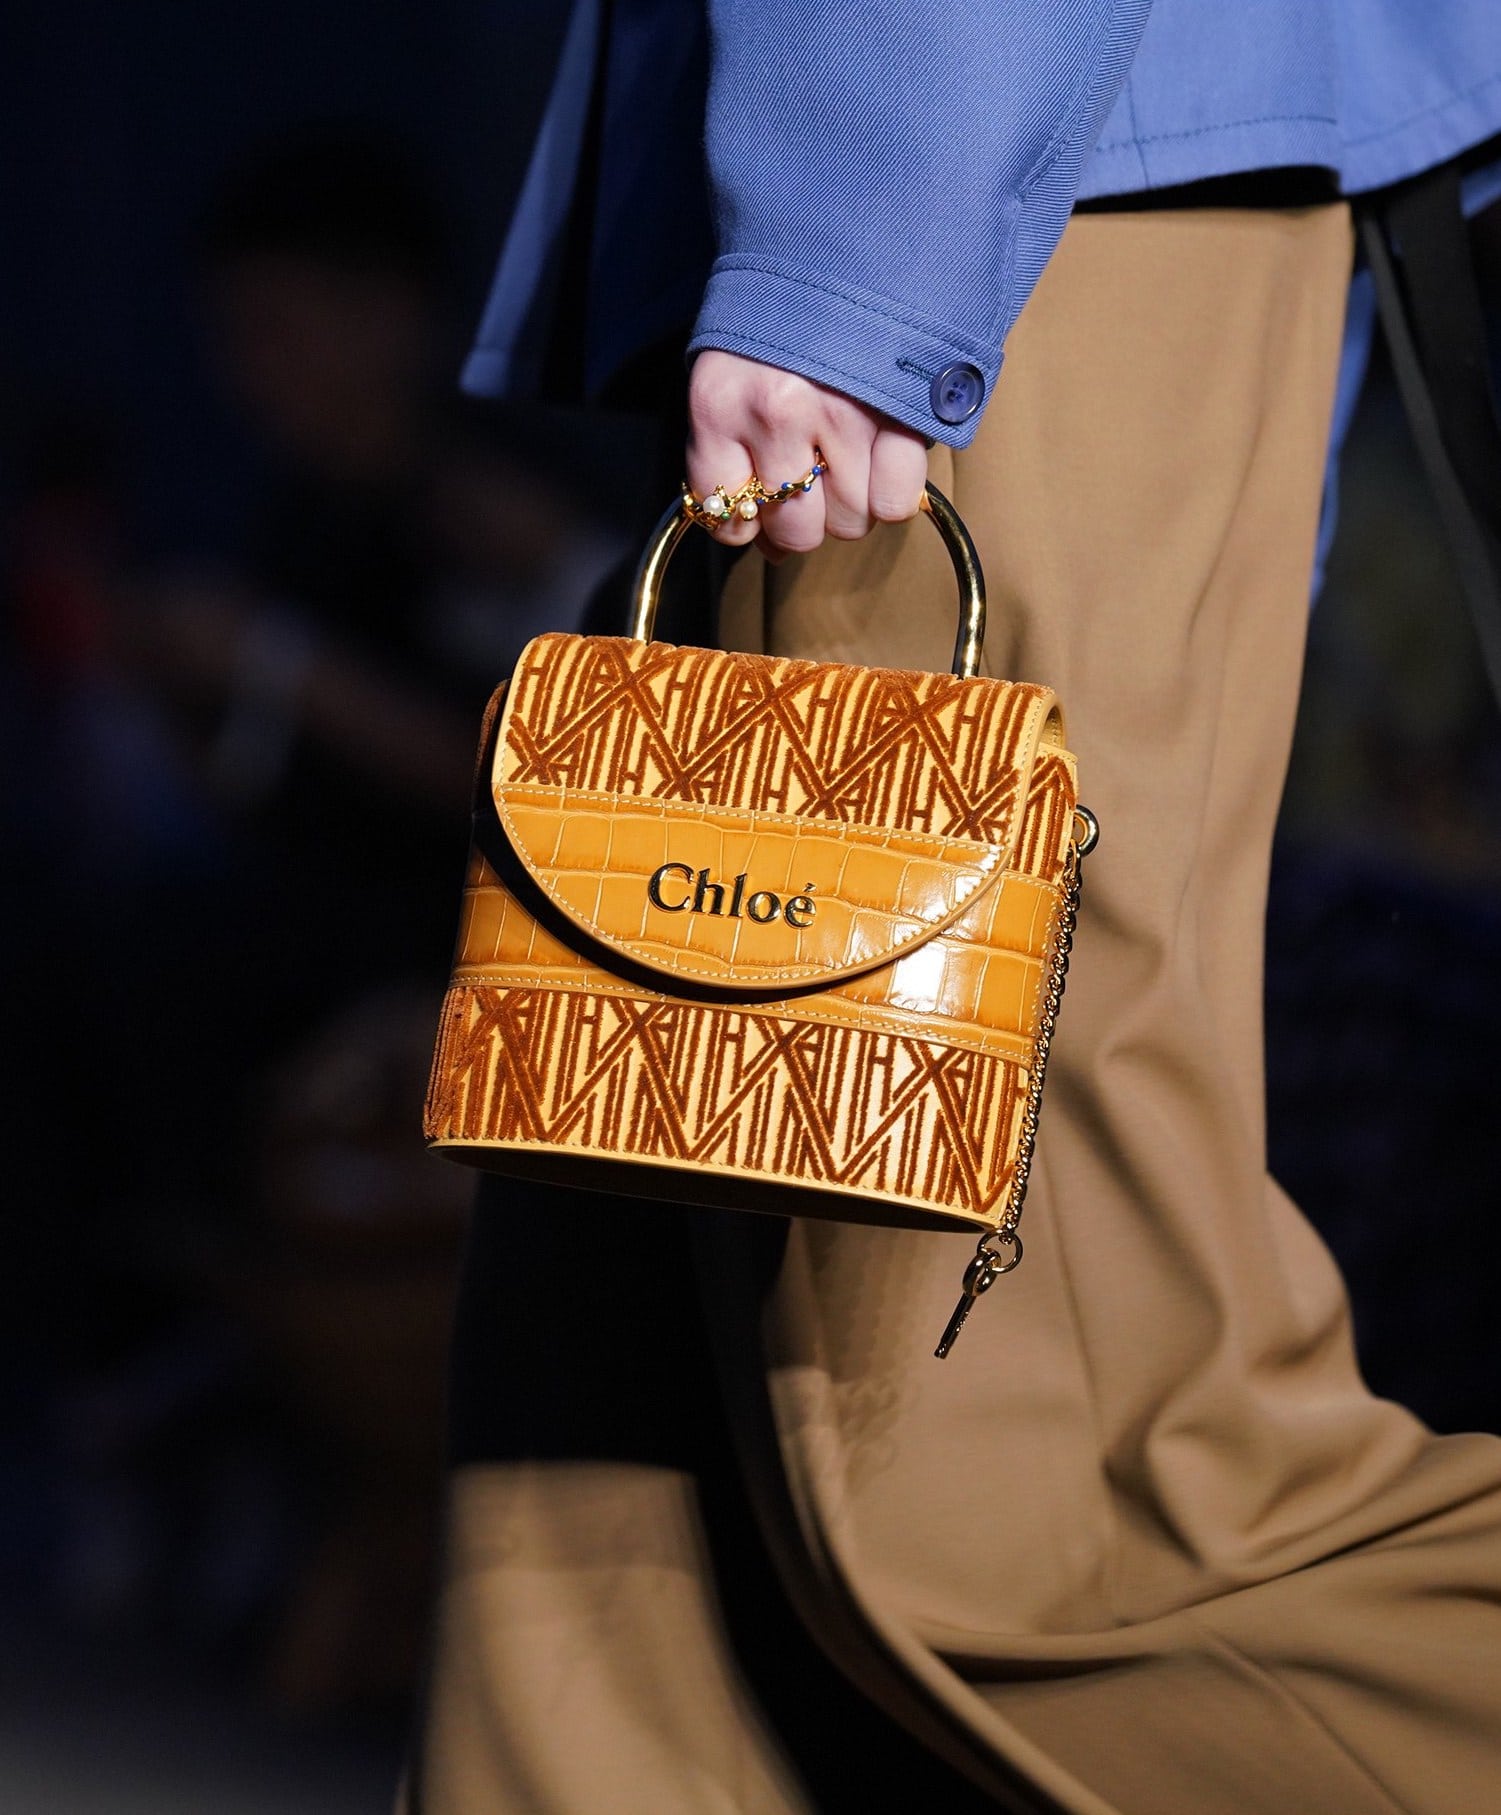 Chloe Resort 2020 Runway Bag Collection | Spotted Fashion